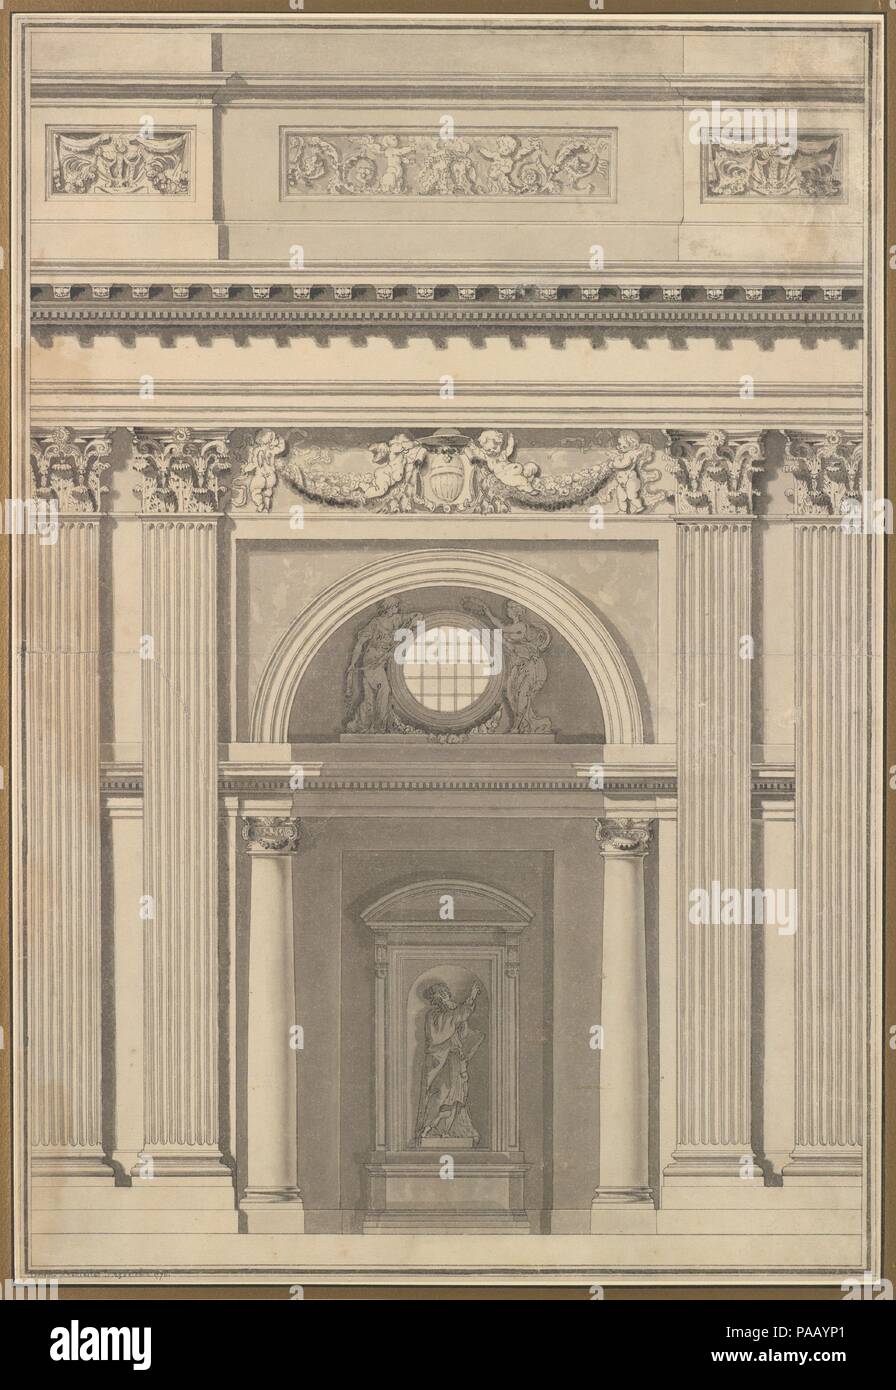 Elevation of a Wall. Artist: Attributed to Jean Guillaume Moitte (French, Paris 1746-1810 Paris). Dimensions: 20 3/8 x 13 15/16 in. (51.8 x 35.4 cm). Date: 1776. Museum: Metropolitan Museum of Art, New York, USA. Stock Photo